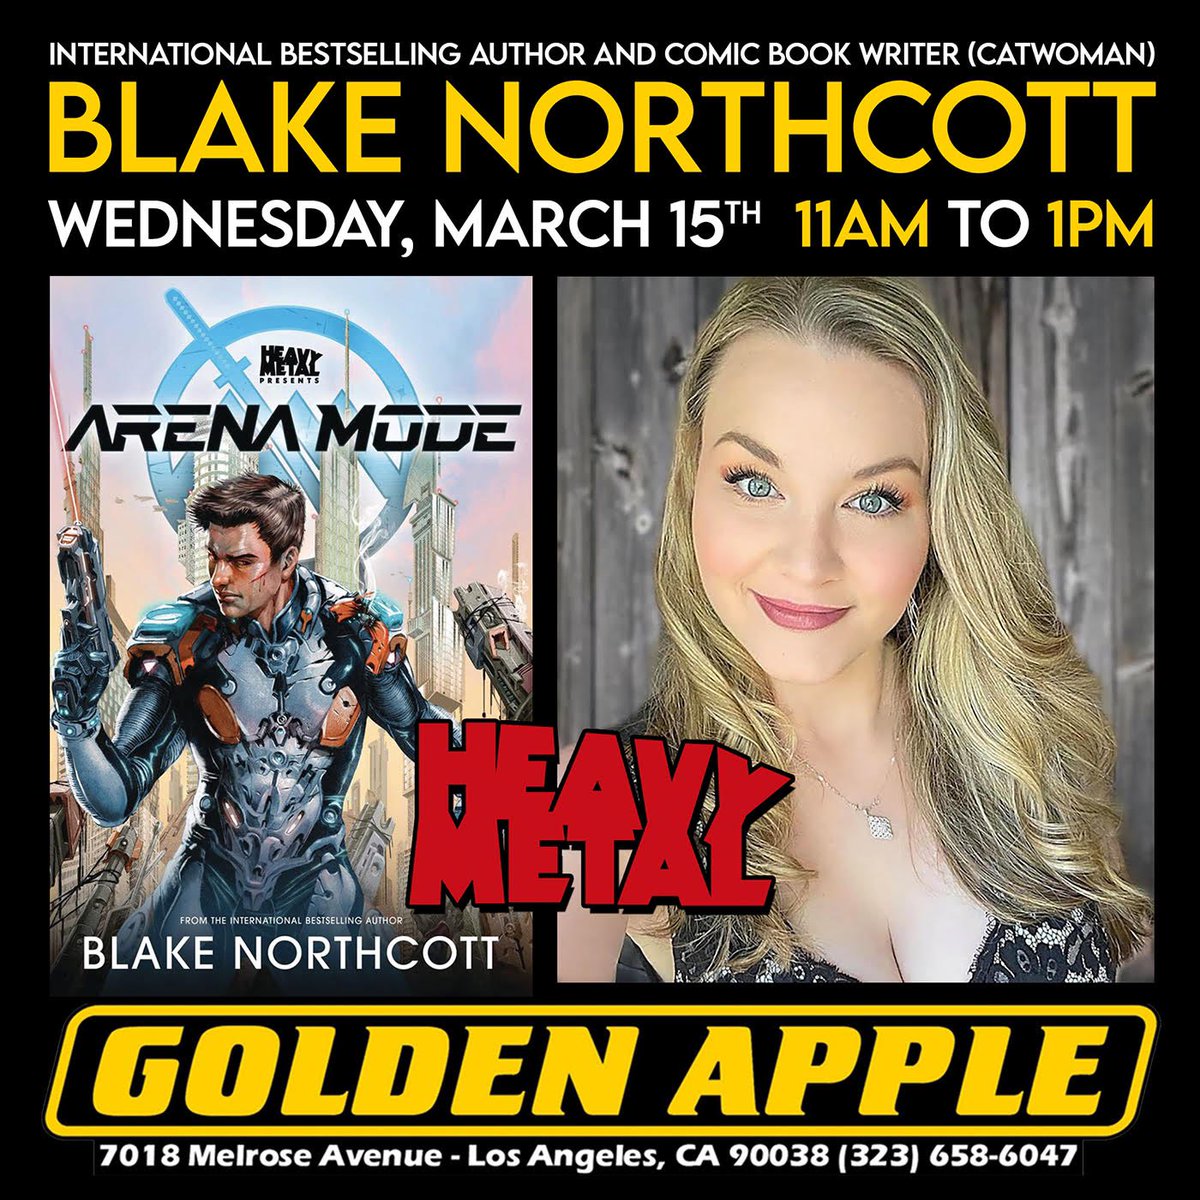 TODAY Meet @BlakeNorthcott 11am-1pm signing copies of Arena Mode @HeavyMetalInk and chat about @evanescence comic and upcoming @Whatnot series 💥